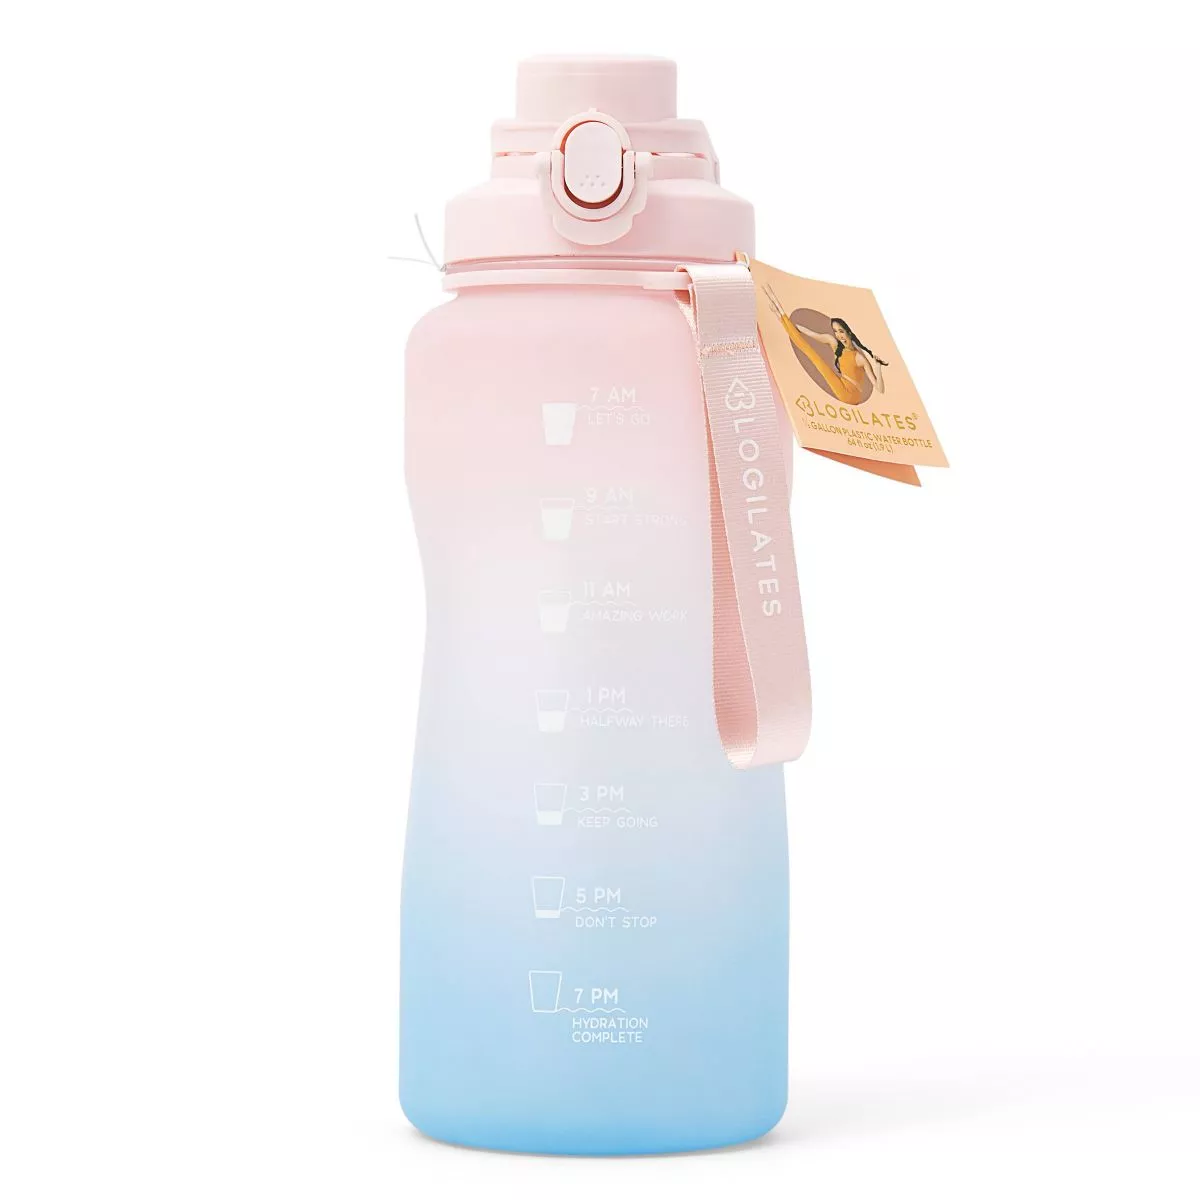 Buy This Water Bottle Sling From Blogilates For Your Next Hike